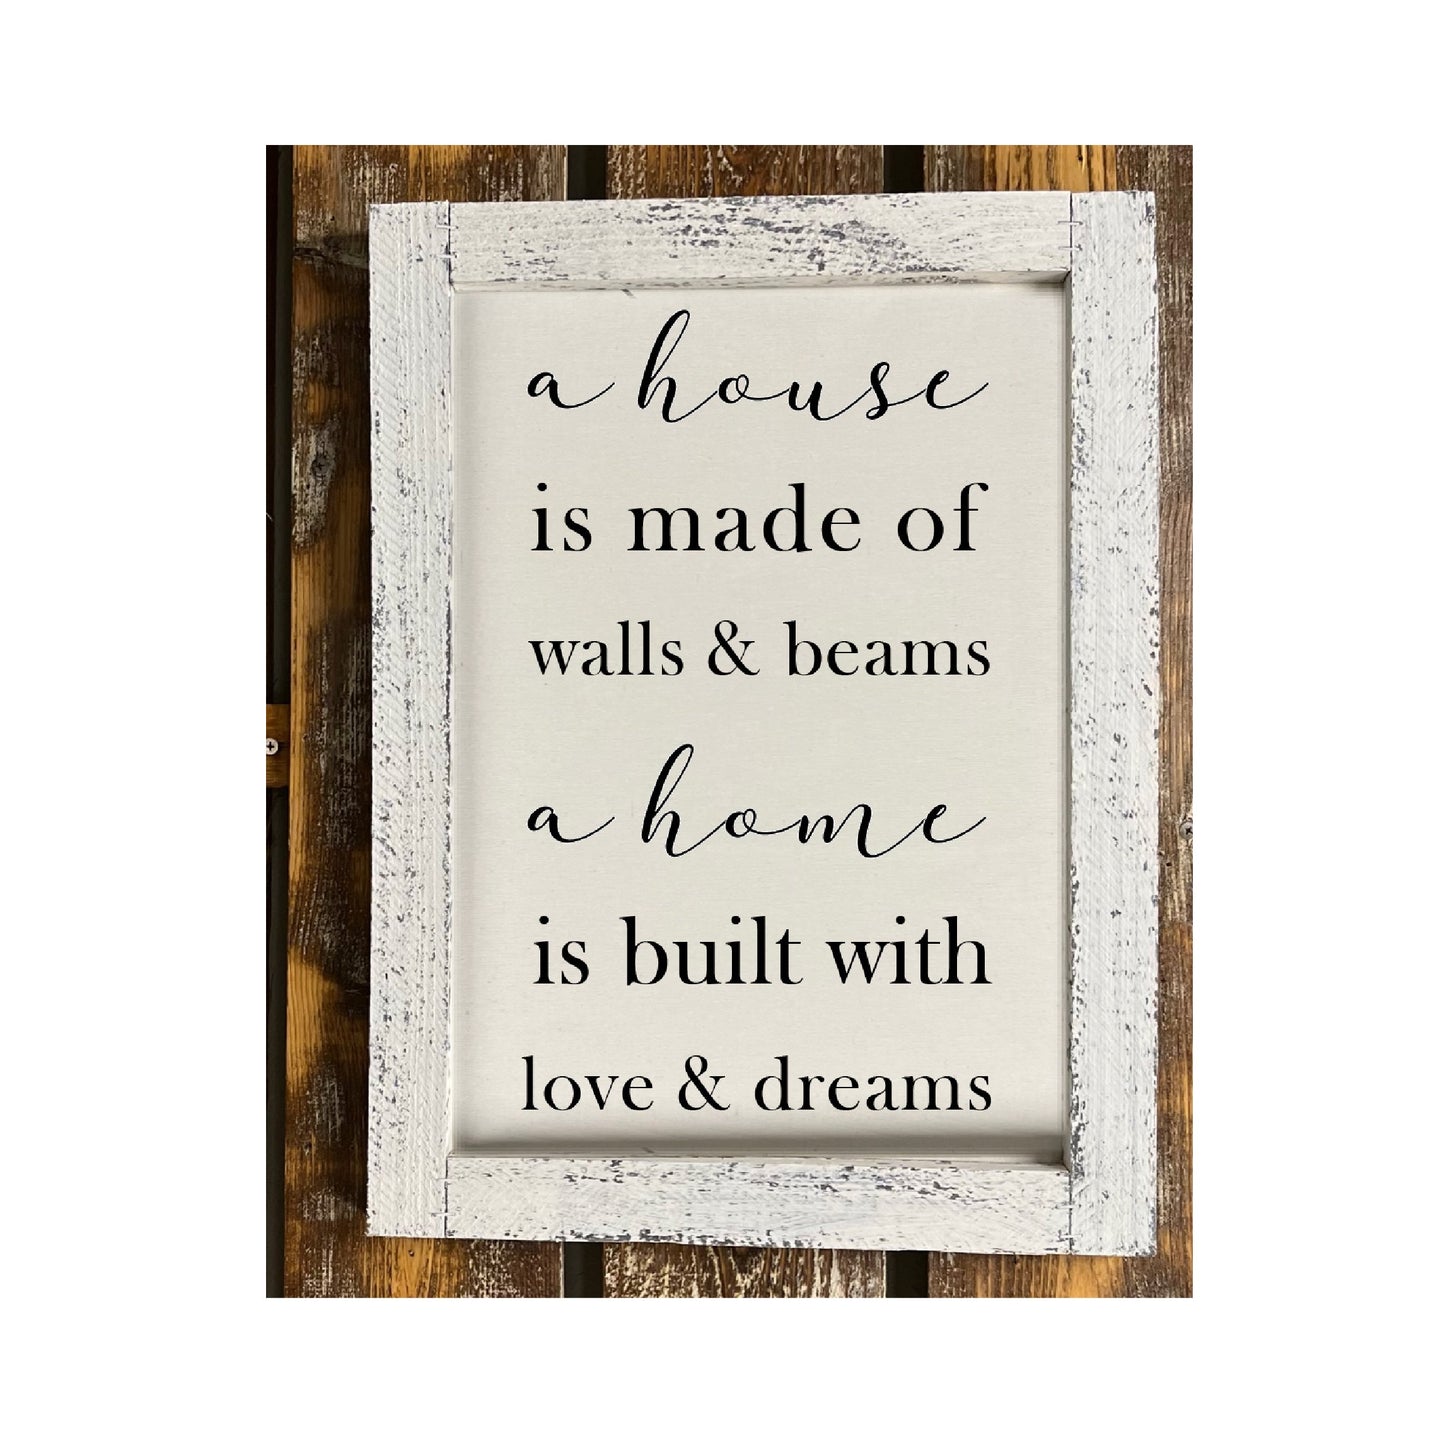 A House Is Made Of Walls And Beams...